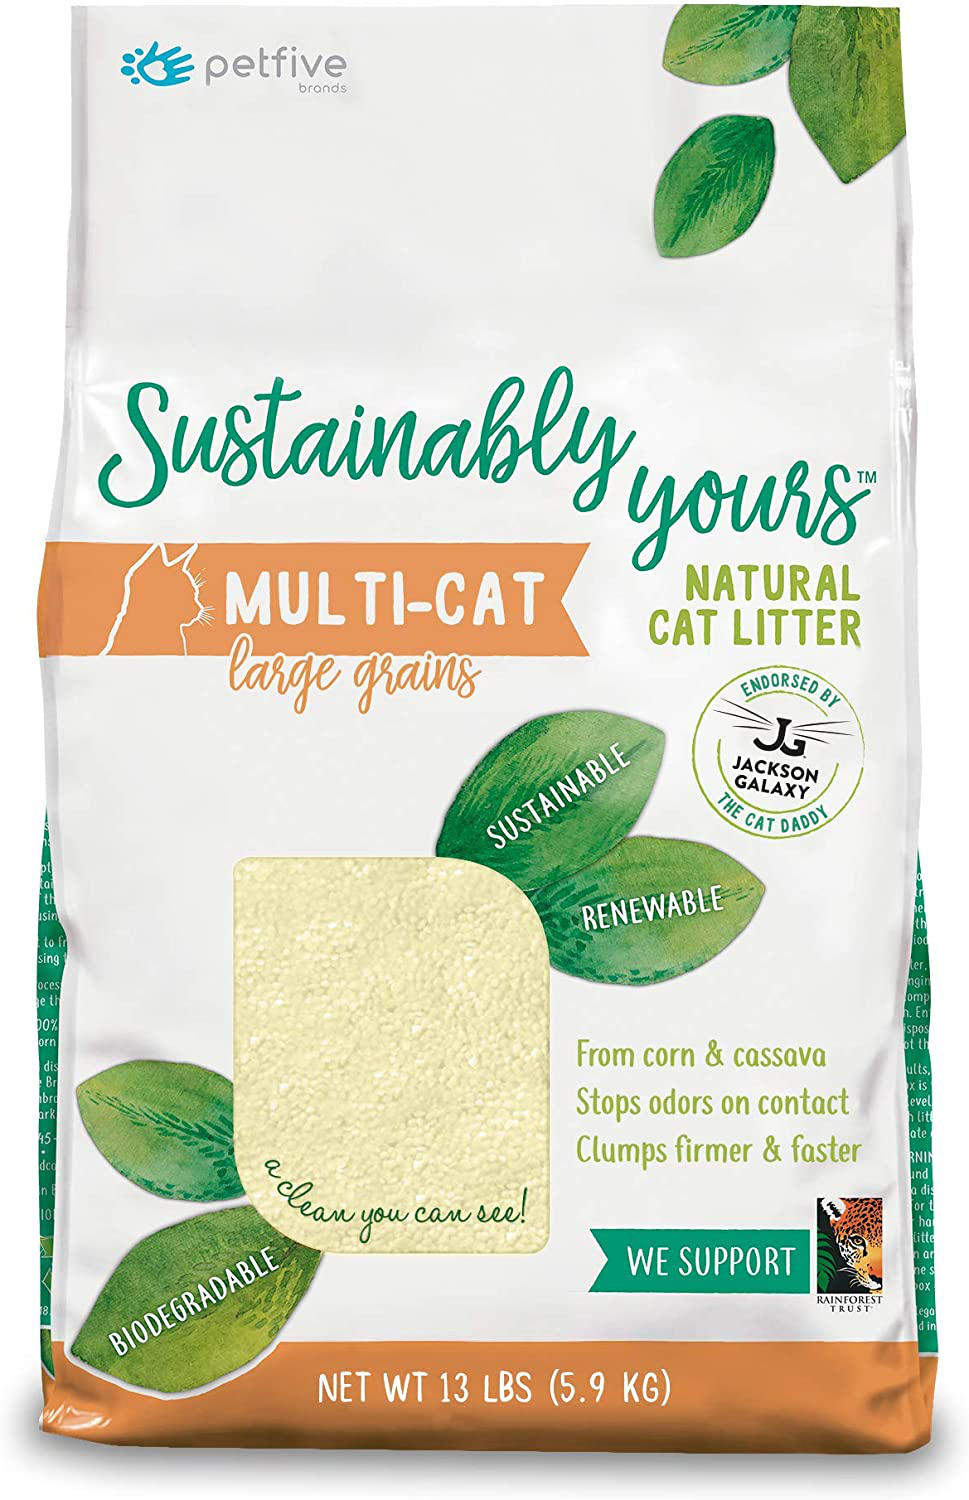 Petfive Sustainably Yours Natural Sustainable Multi-Cat Litter, 13 Lbs